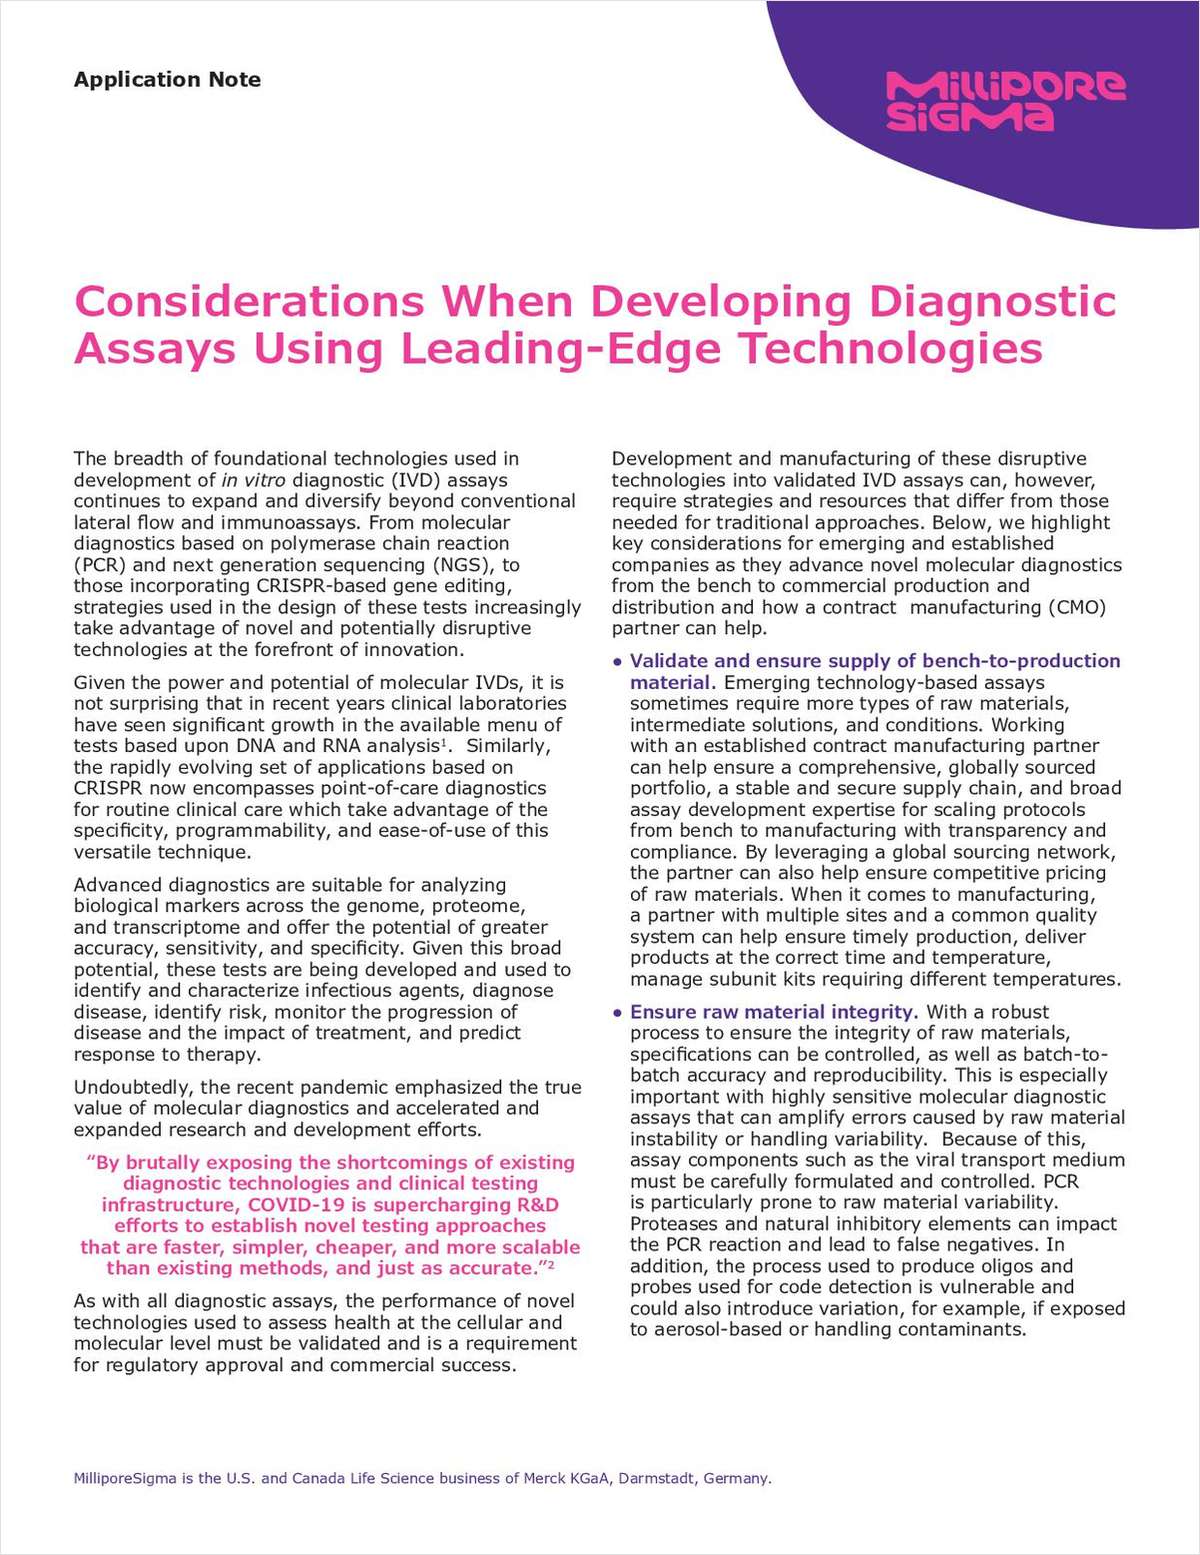 Considerations When Developing Diagnostic Assays Using Leading-Edge Technologies